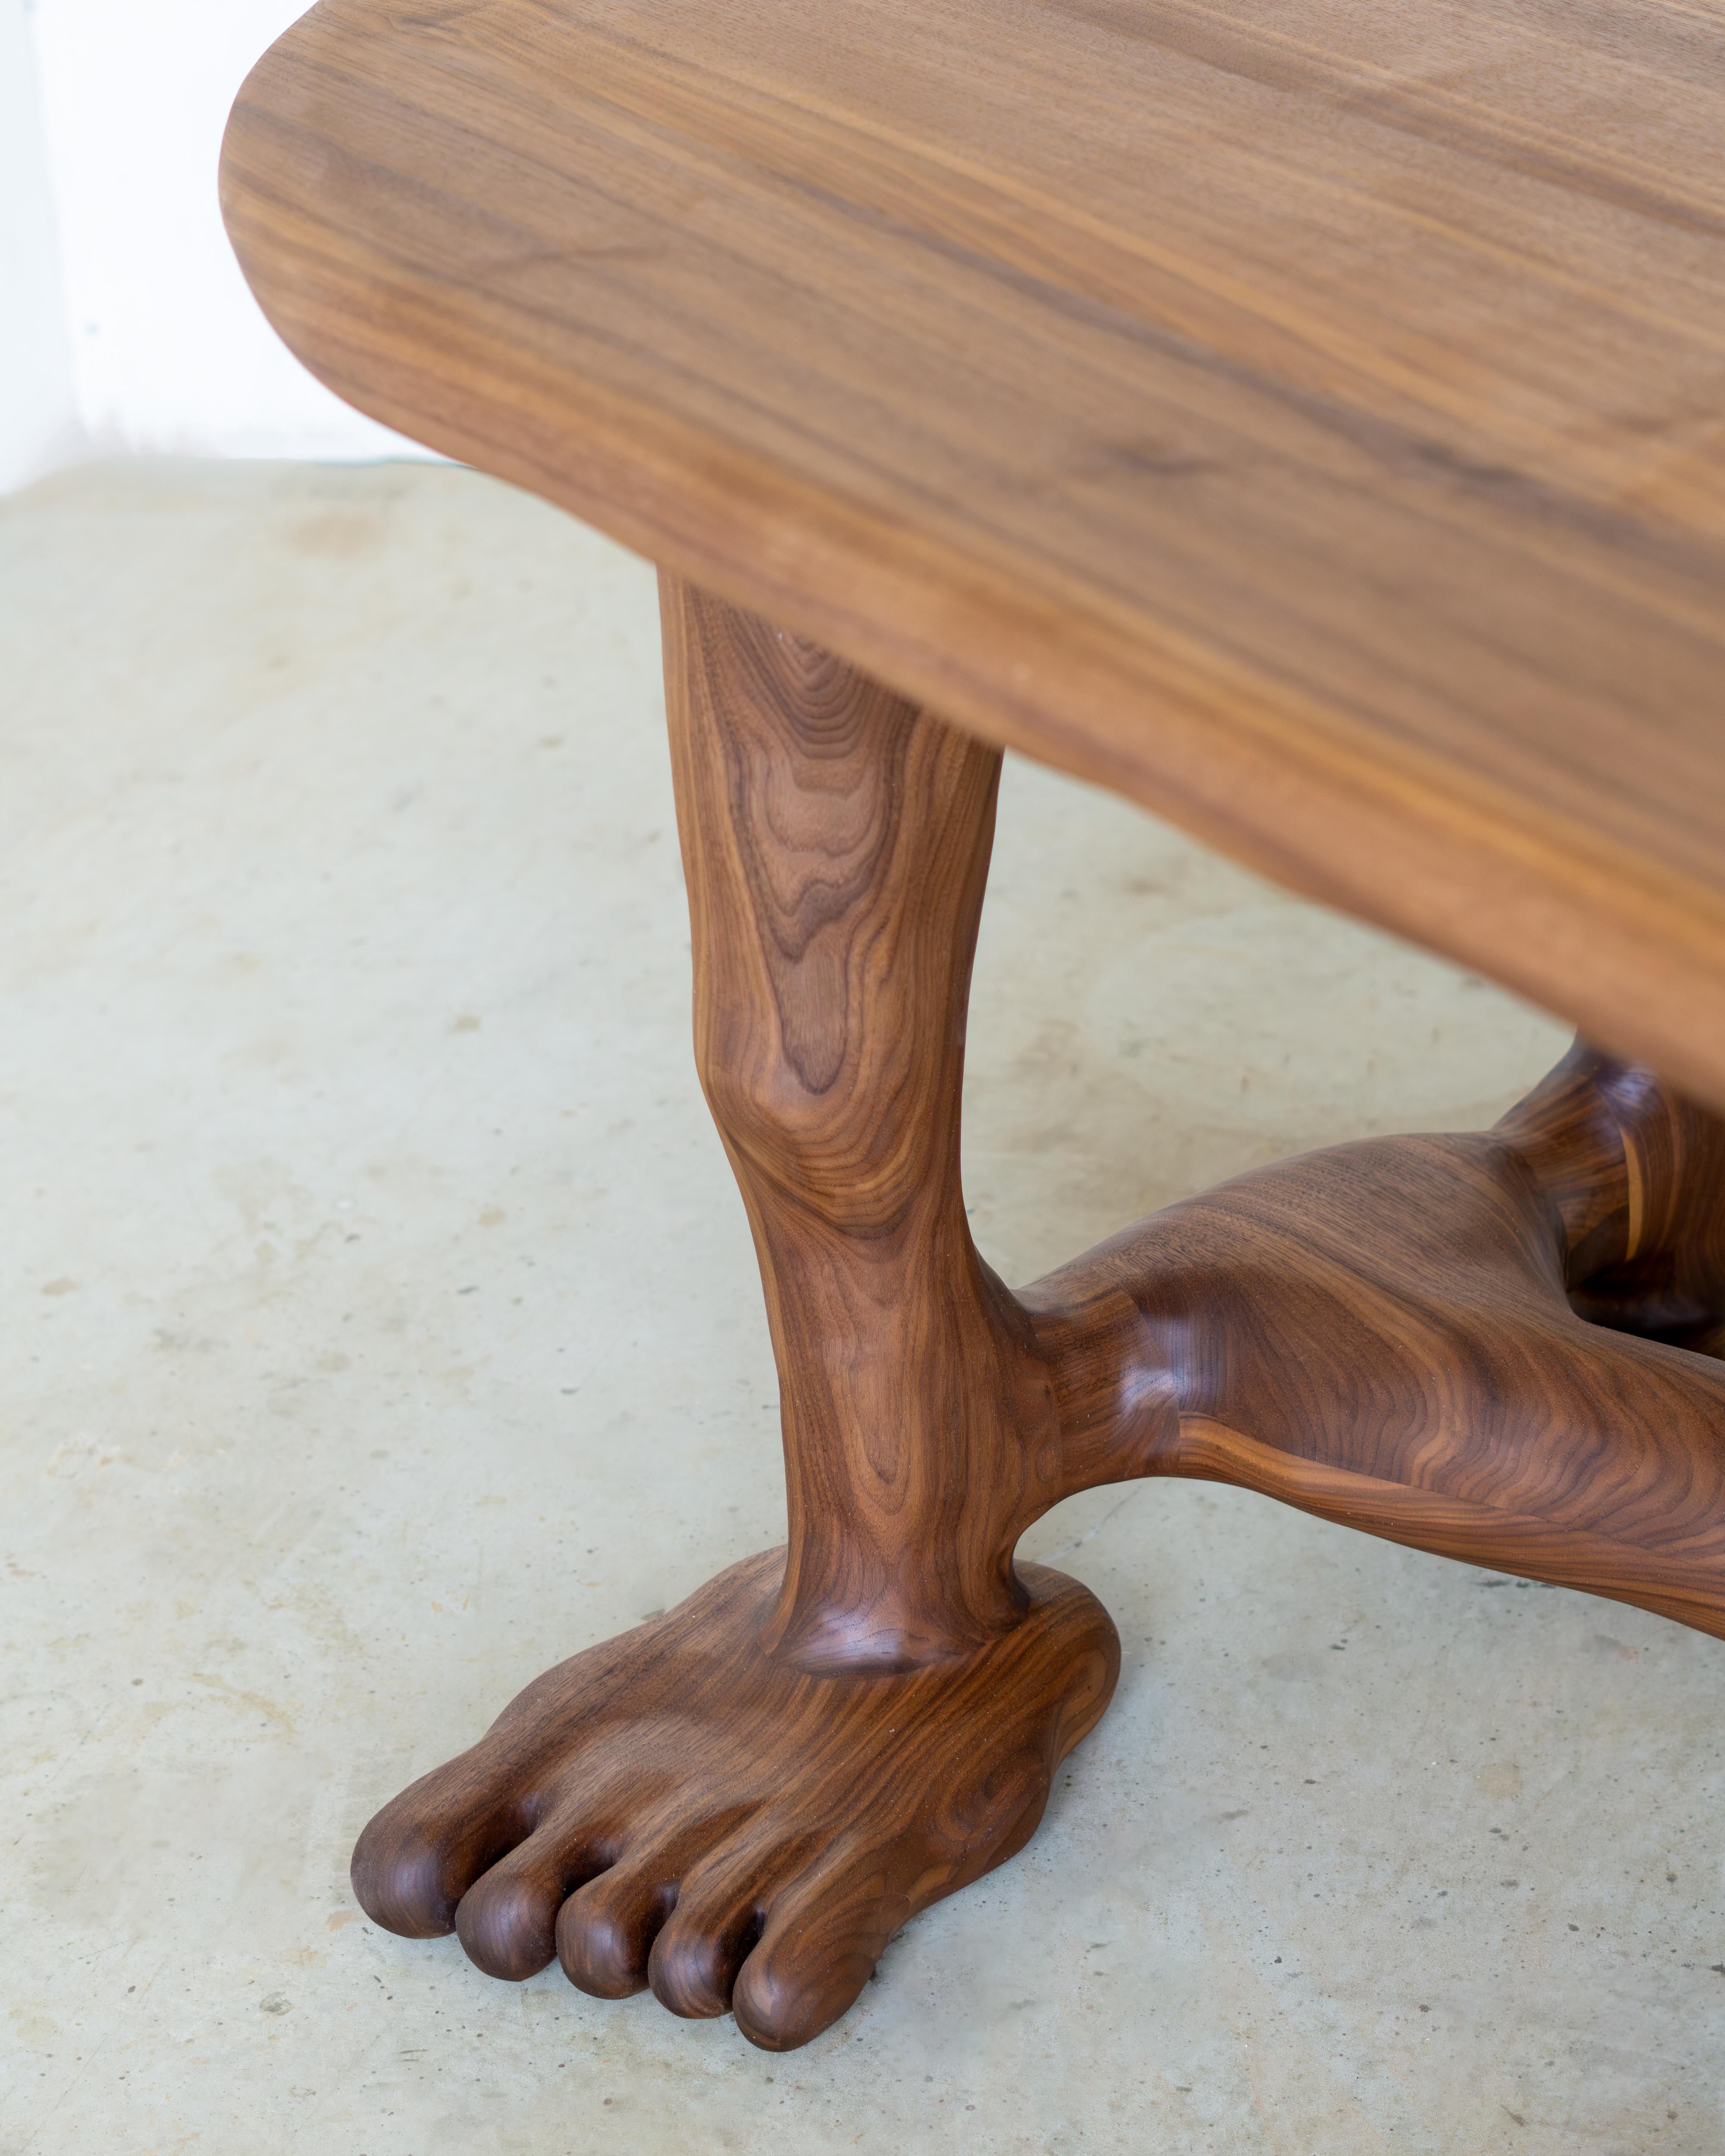 The Leg Dining Table is sculpted using various hand tools, making each piece unique with its own distinctive wood grain. The sculptural table is characterized by its seamless flow, with no sharp edges or corners.  It is crafted from a large piece of